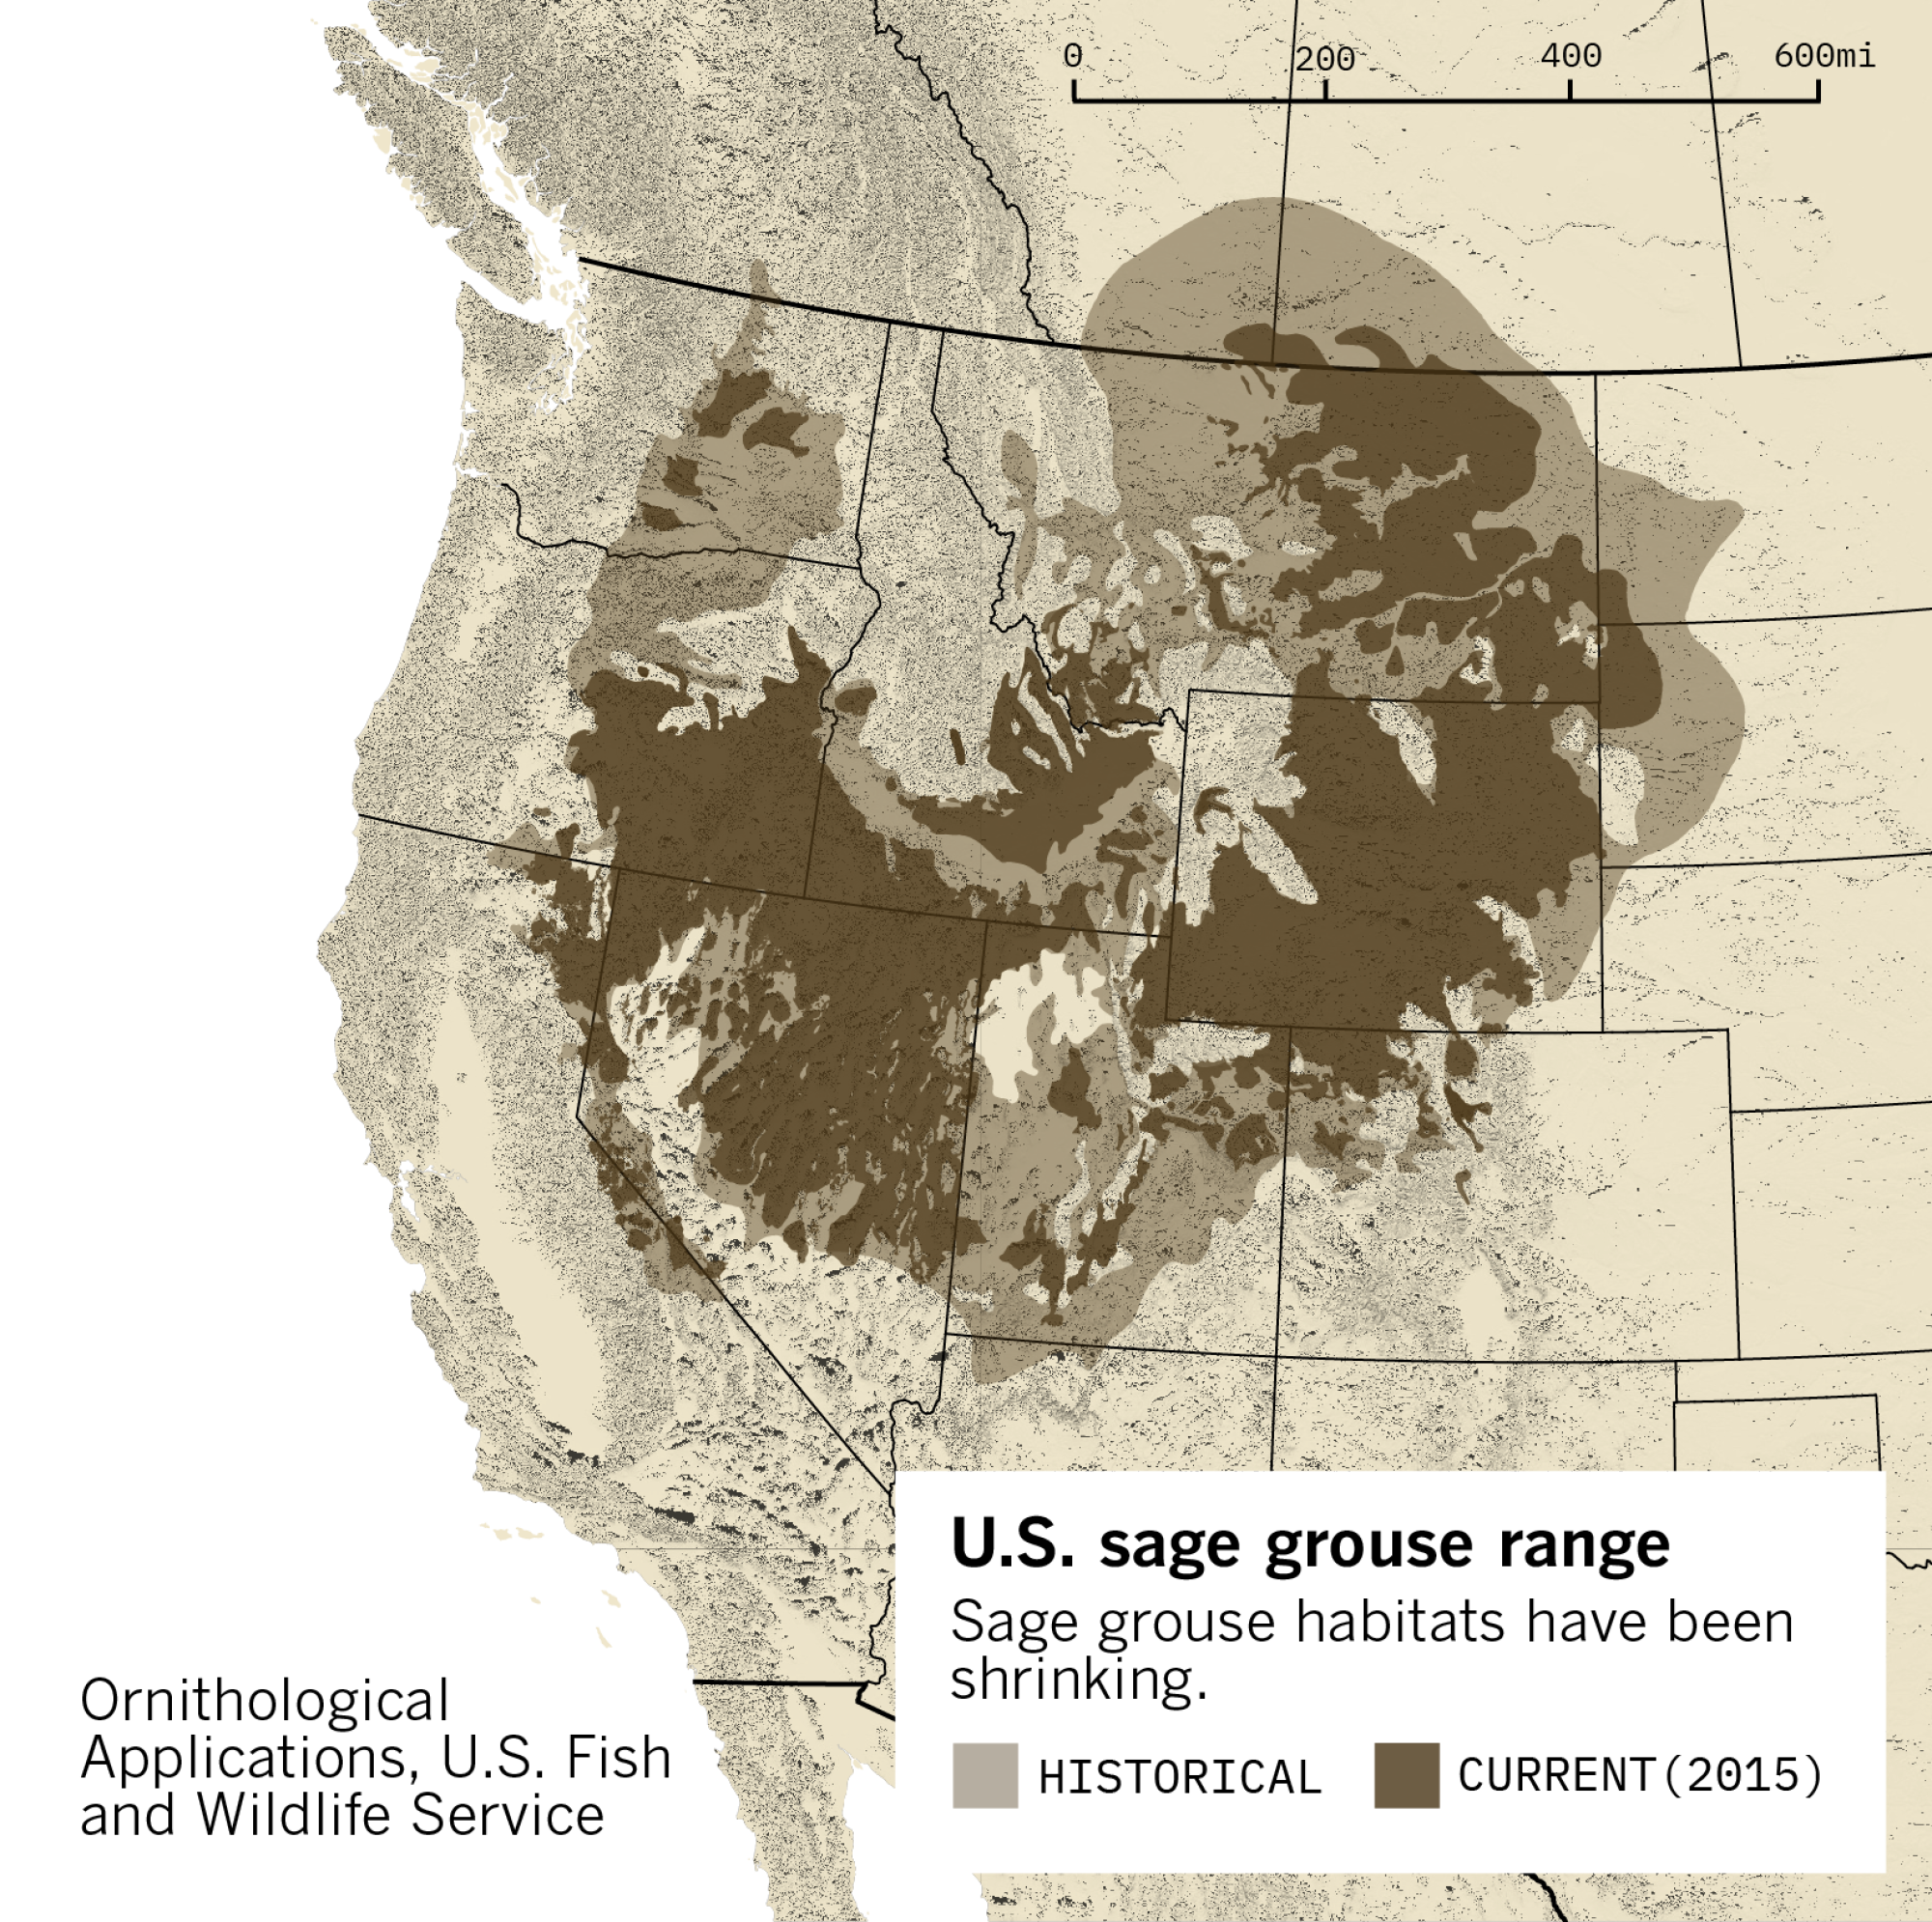 A map of current and historical ranges of greater sage grouse in the U.S.